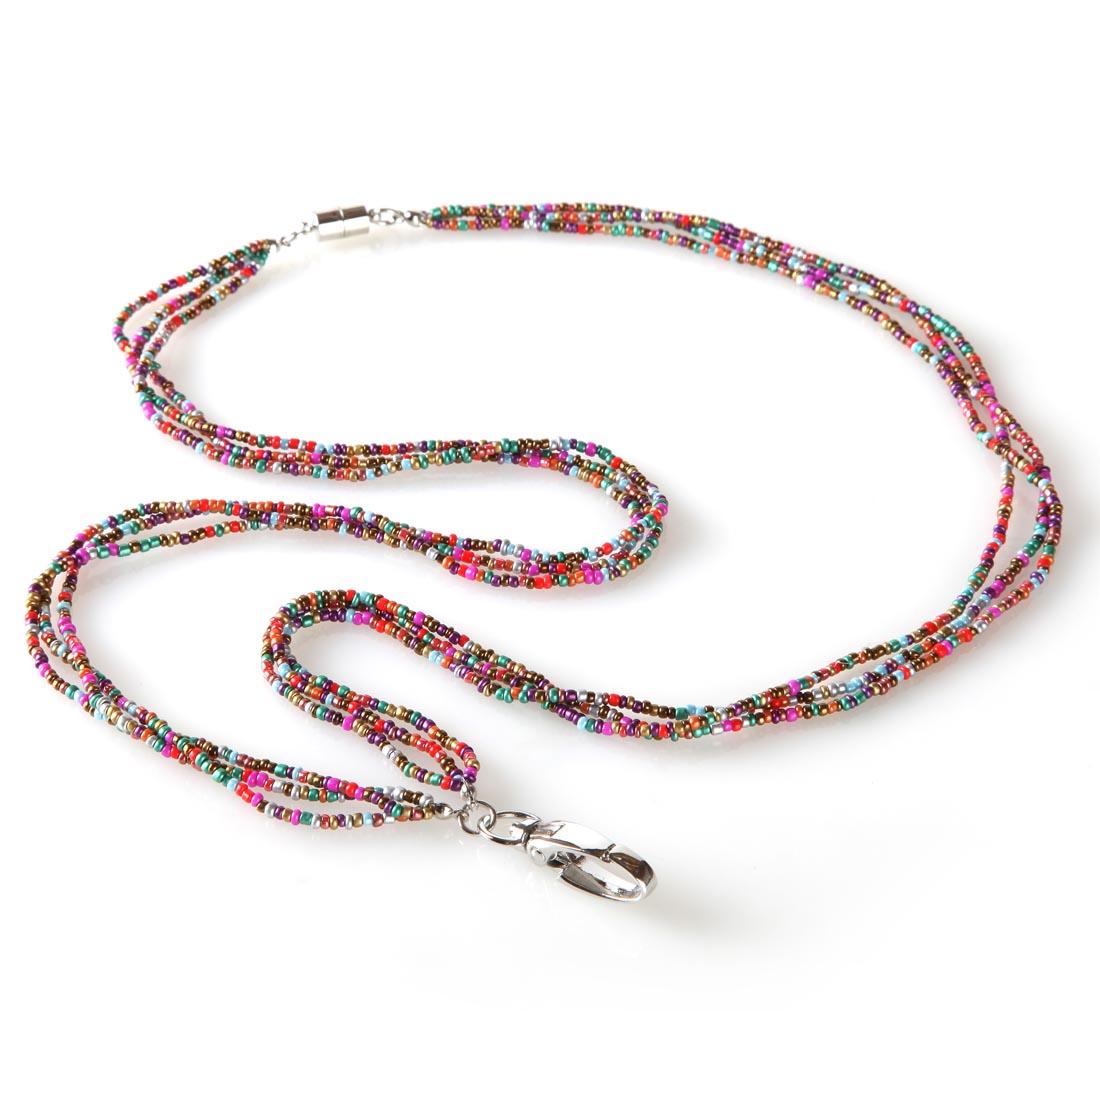 Clip Lanyard with Three Strands of Small Beads